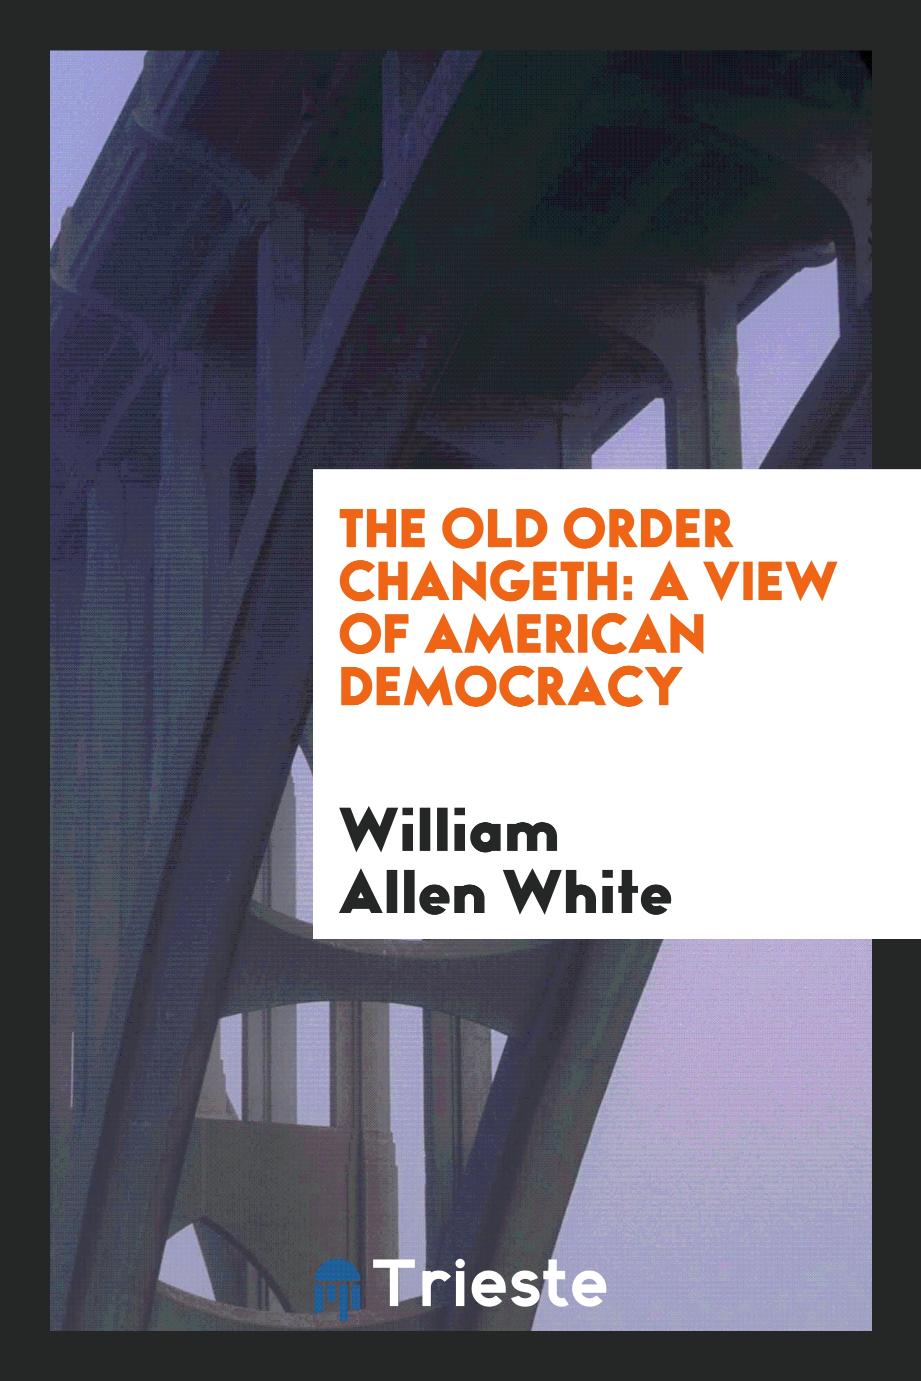 The Old Order Changeth: A View of American Democracy